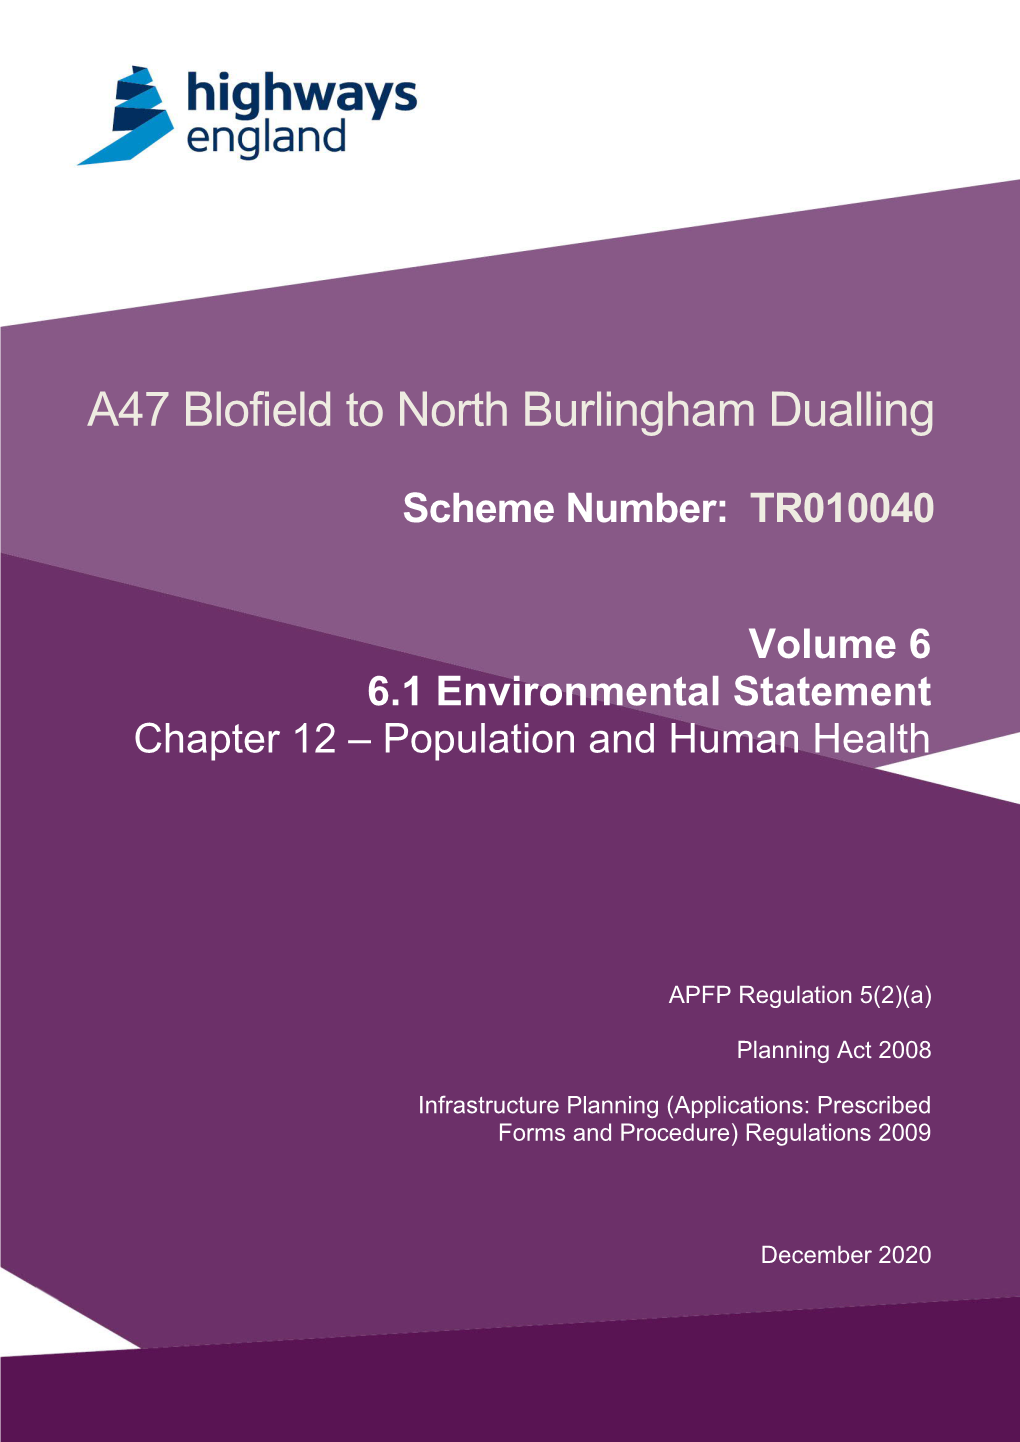 A47 Blofield to North Burlingham Dualling [Scheme Name] Scheme[Scheme Number: Number Trtr100xx]010040 1.3 Introduction to the Application